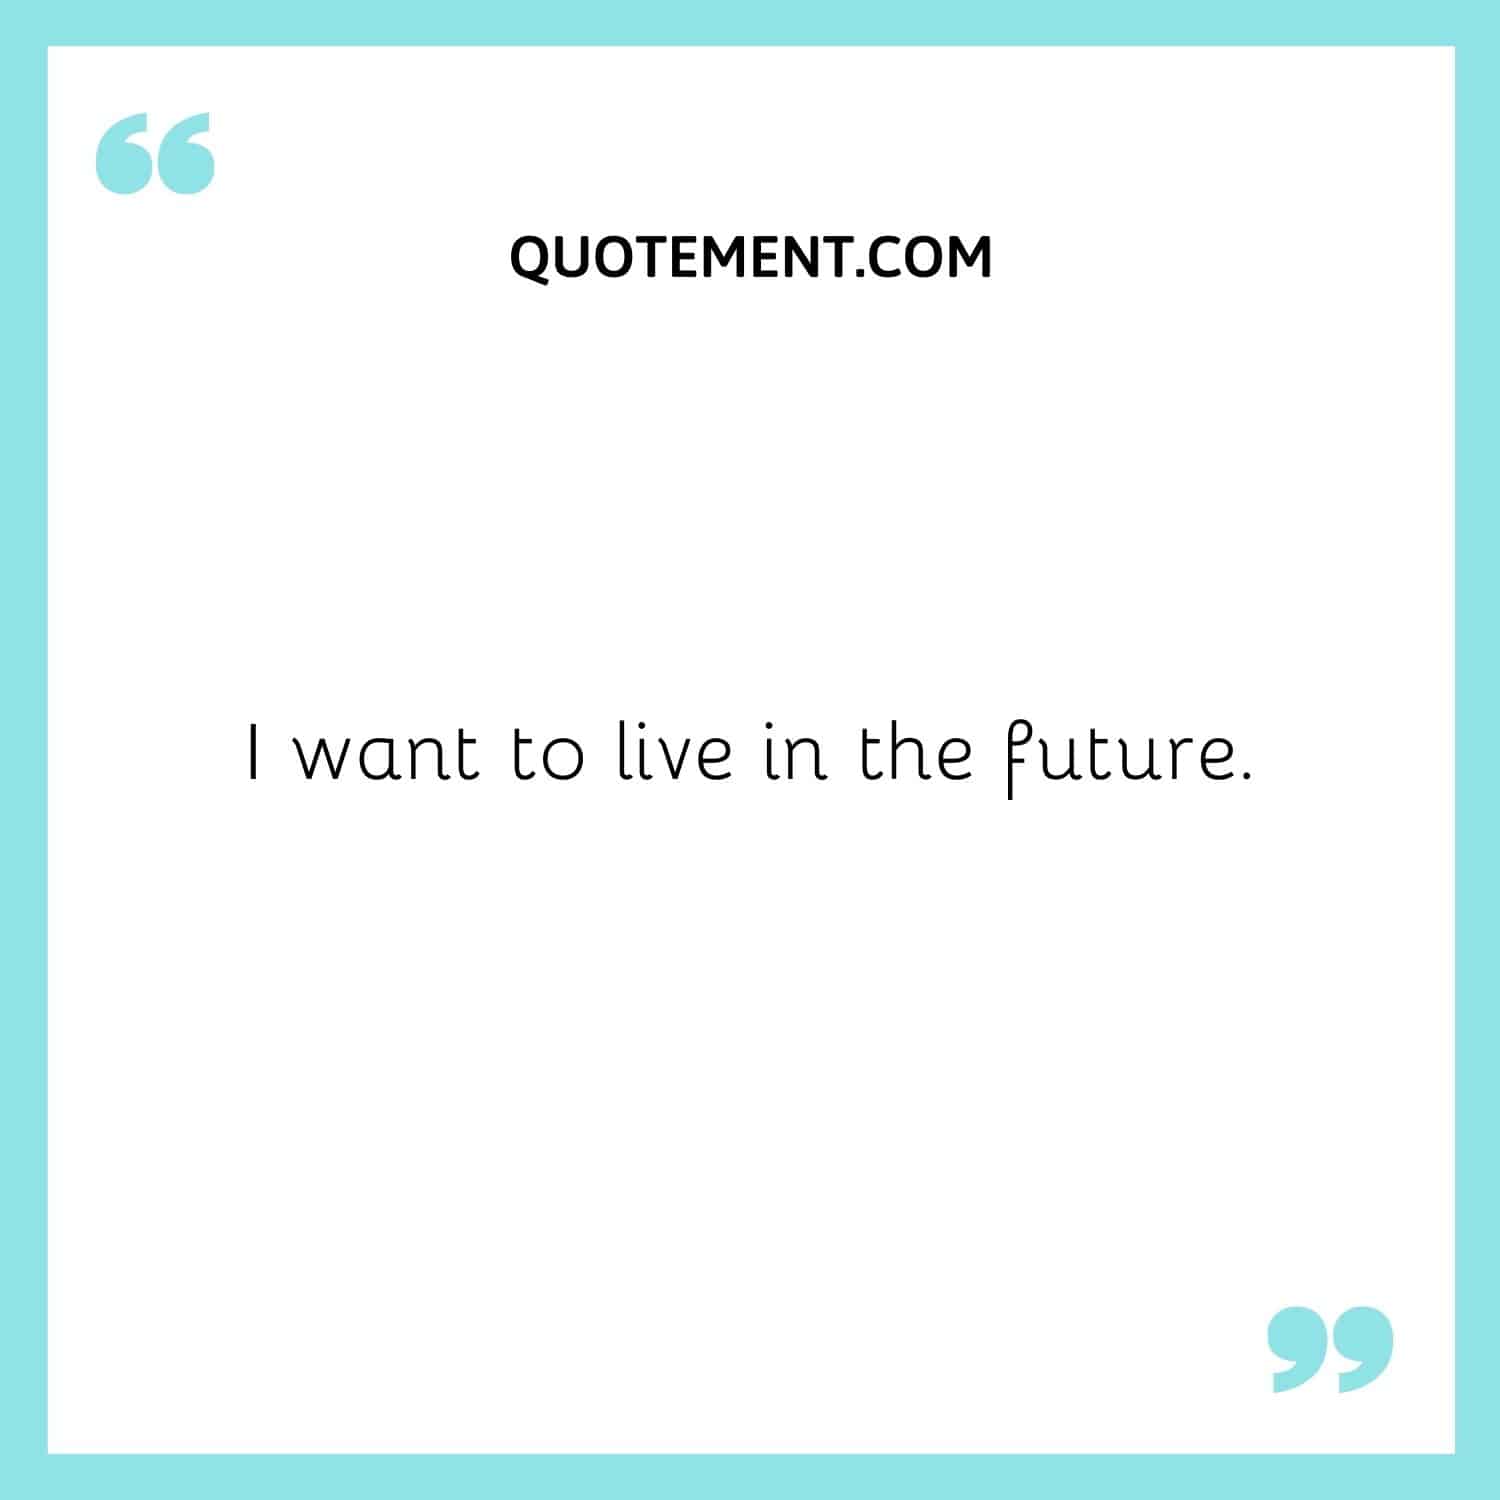 I want to live in the future.